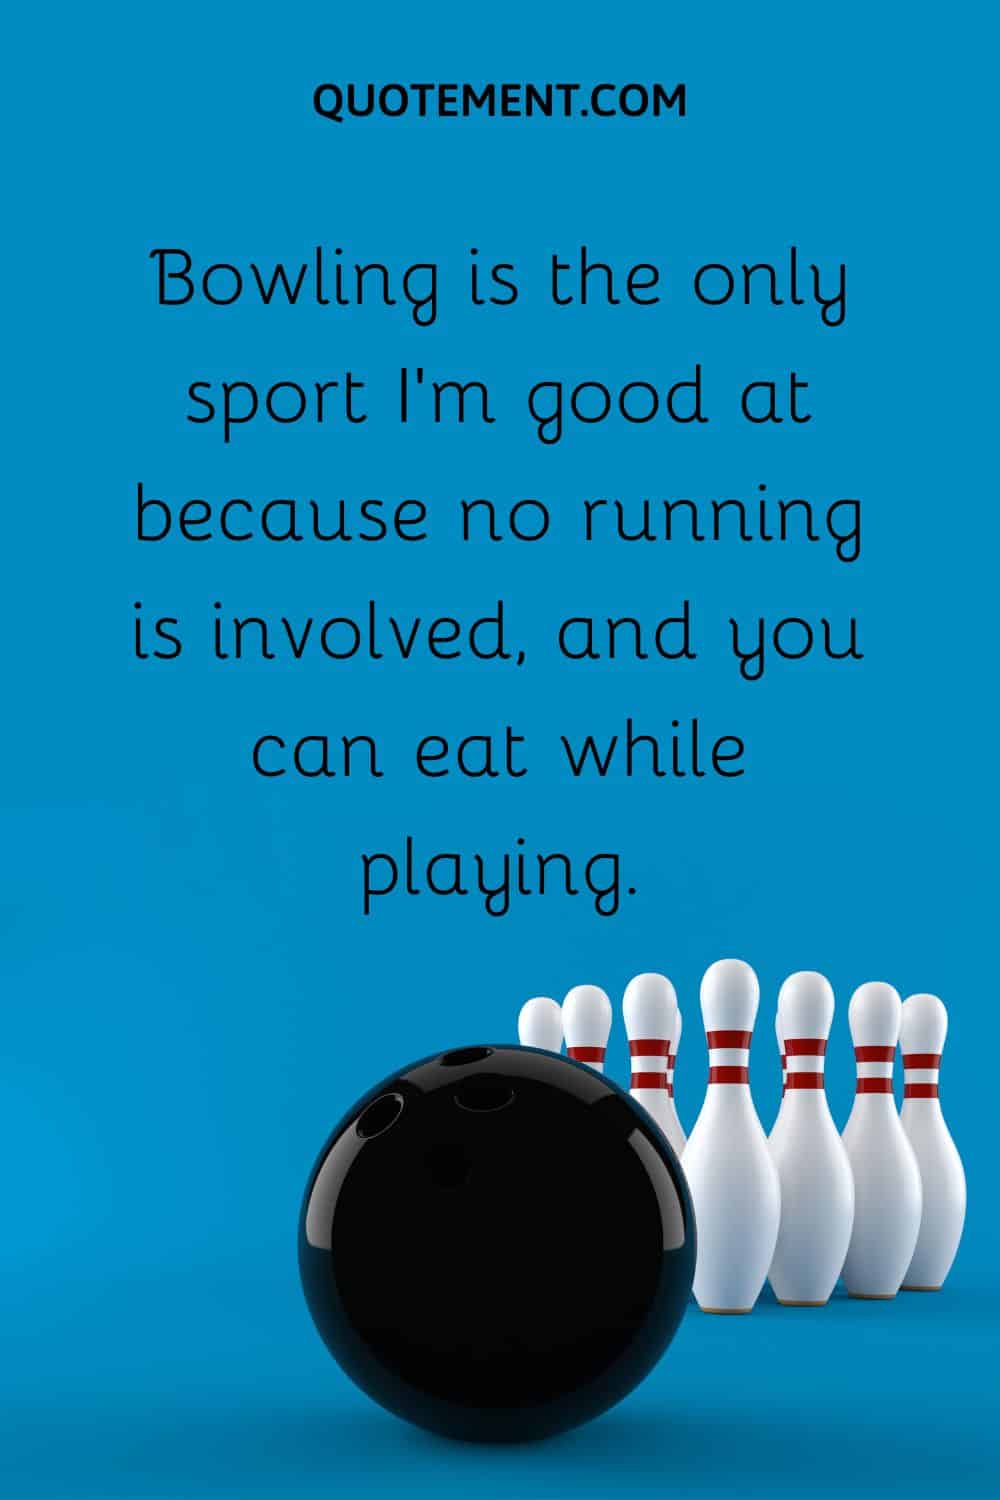 Bowling is the only sport I’m good at because no running is involved, and you can eat while playing